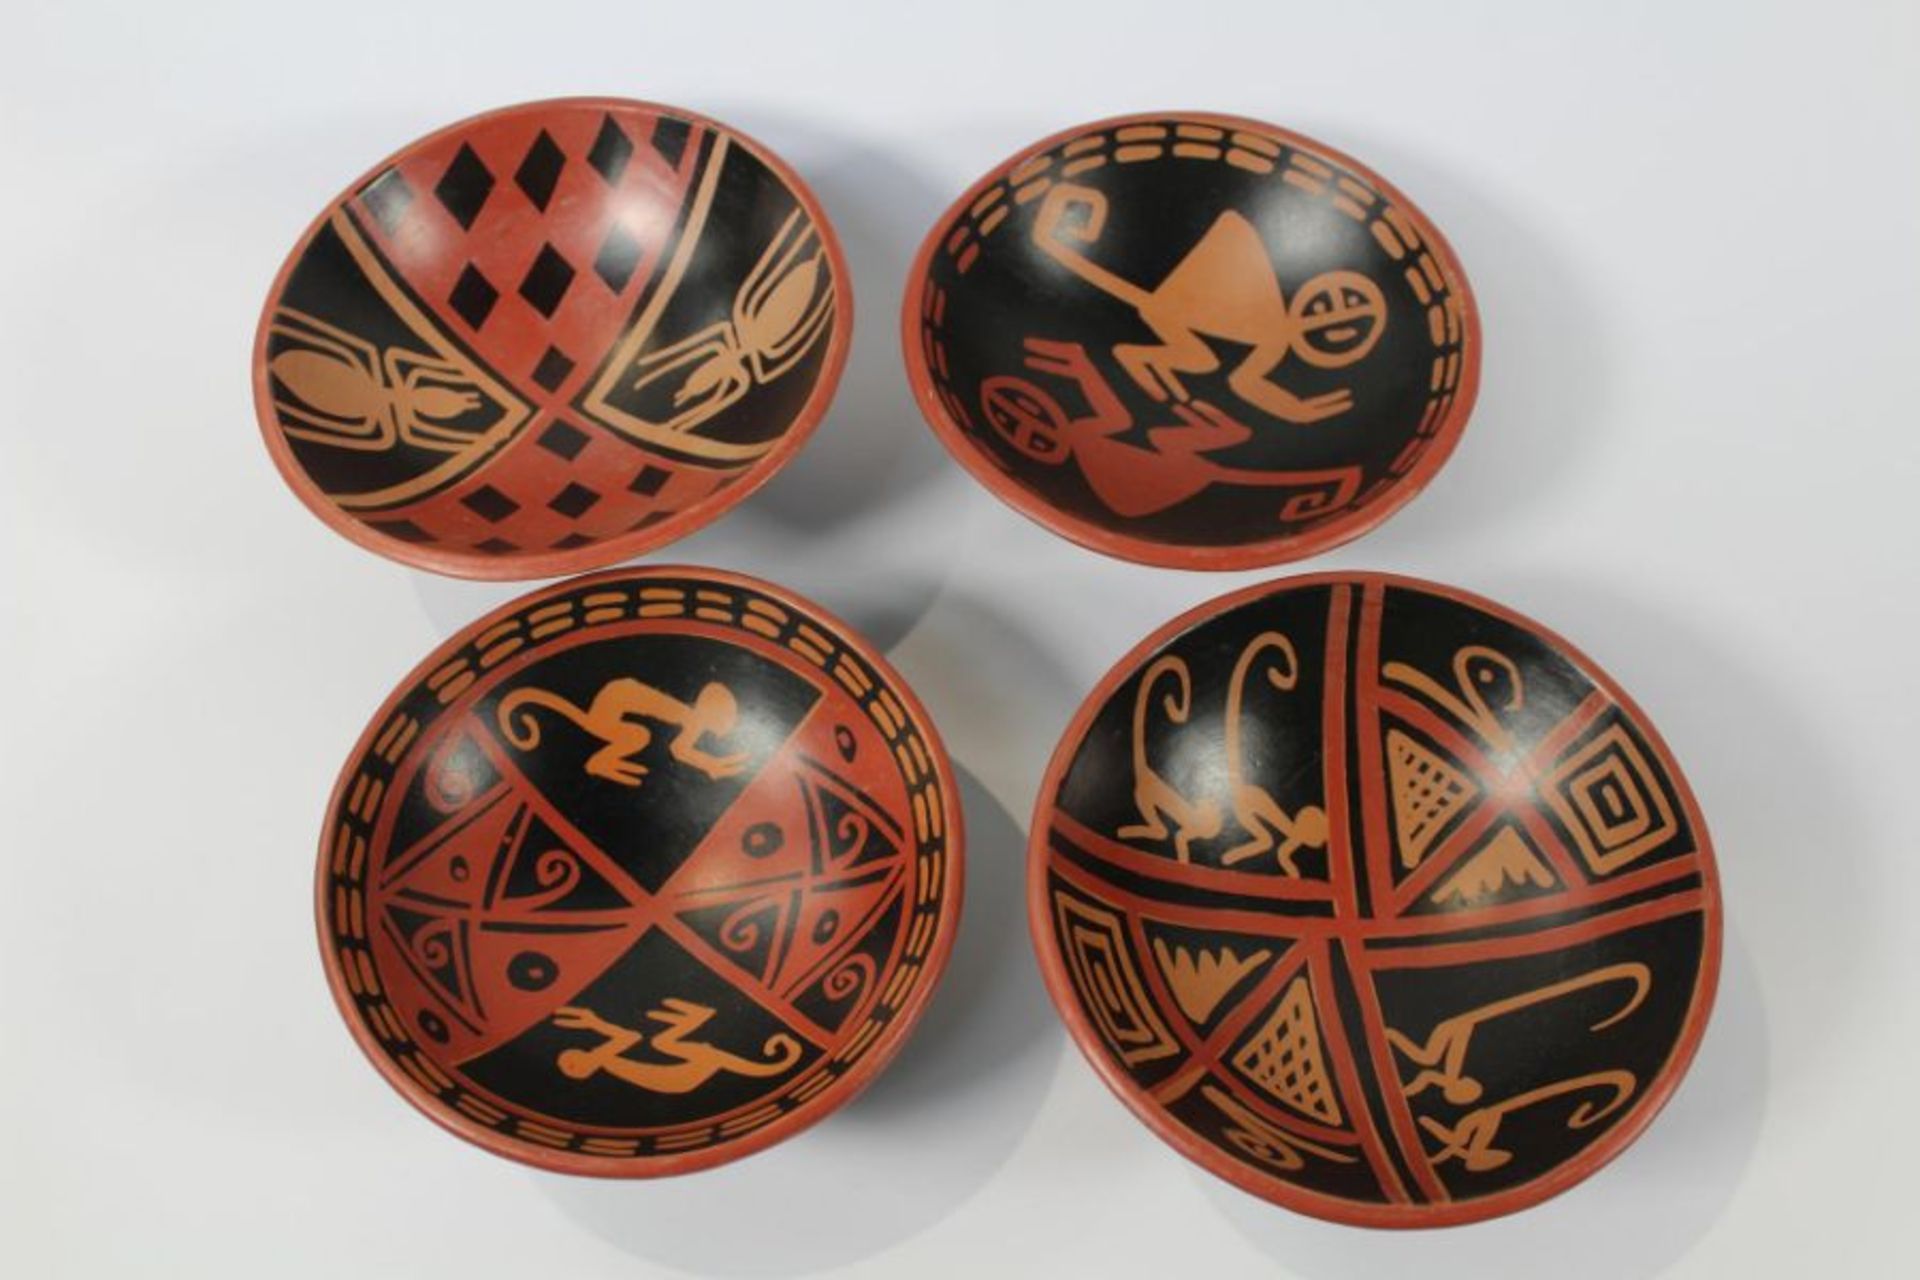 A quantity of Latin American Style Pottery Bowls (approximately 50).